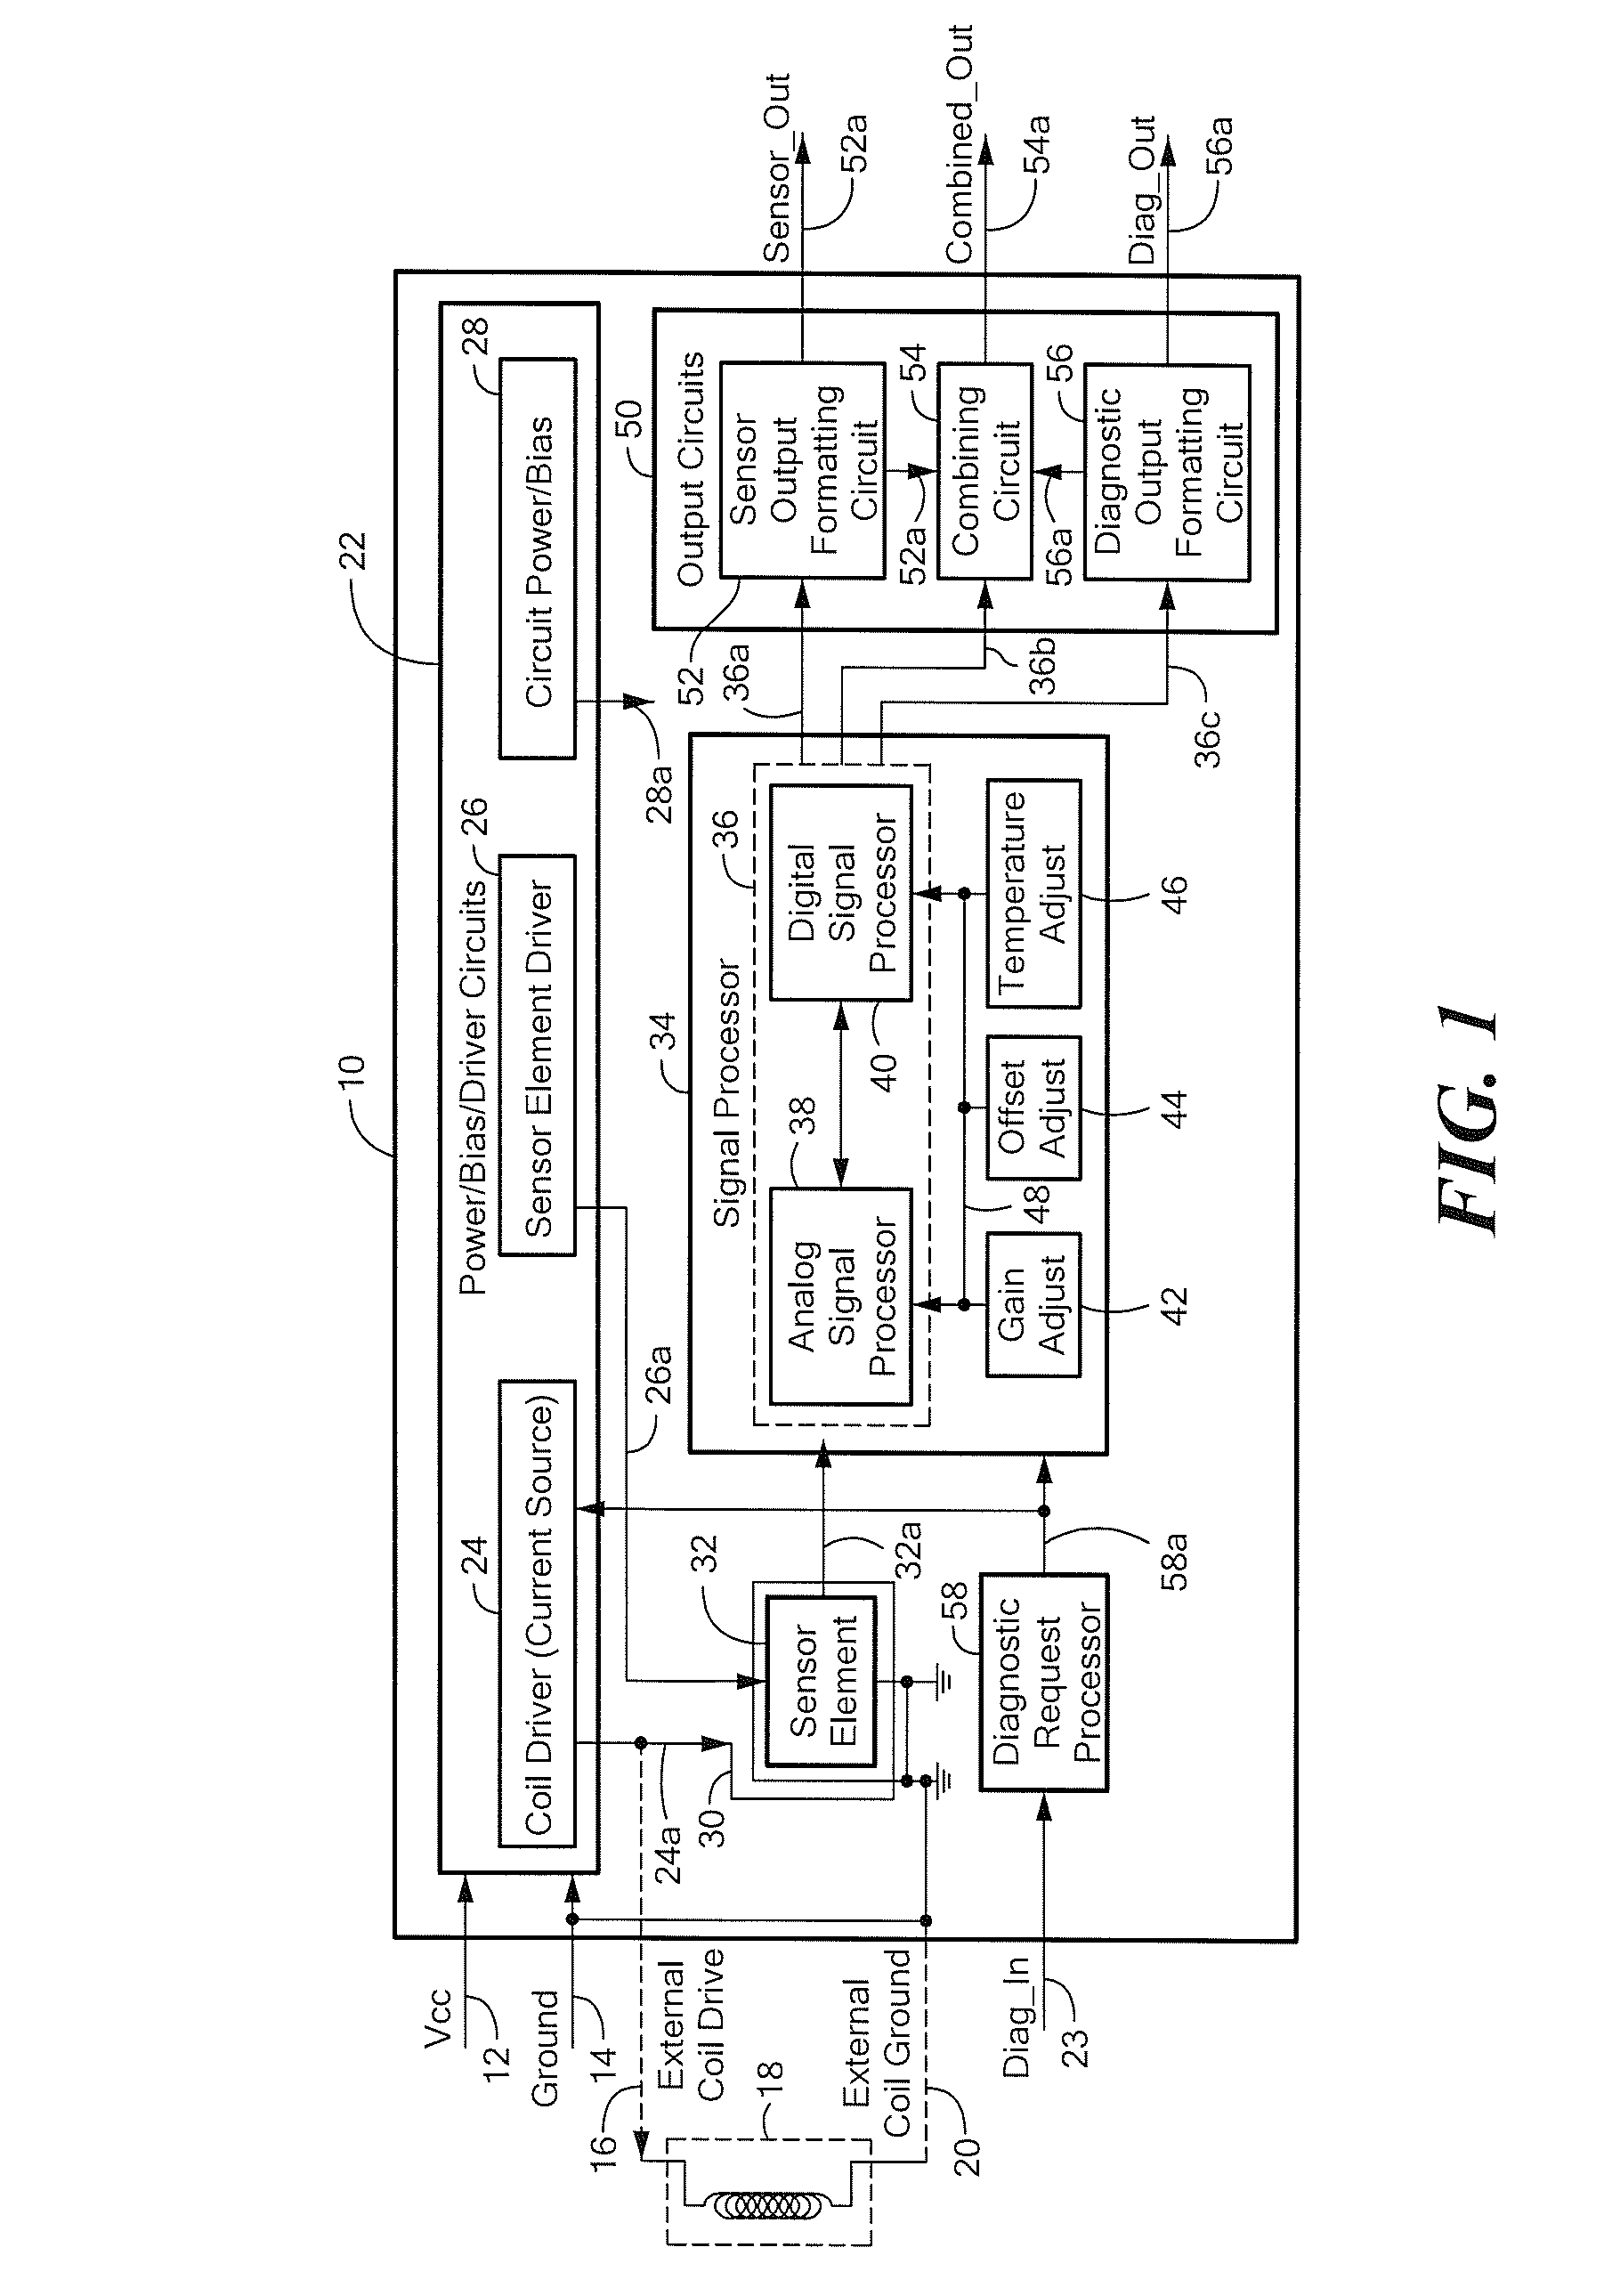 Circuits and Methods for Generating a Self-Test of a Magnetic Field Sensor